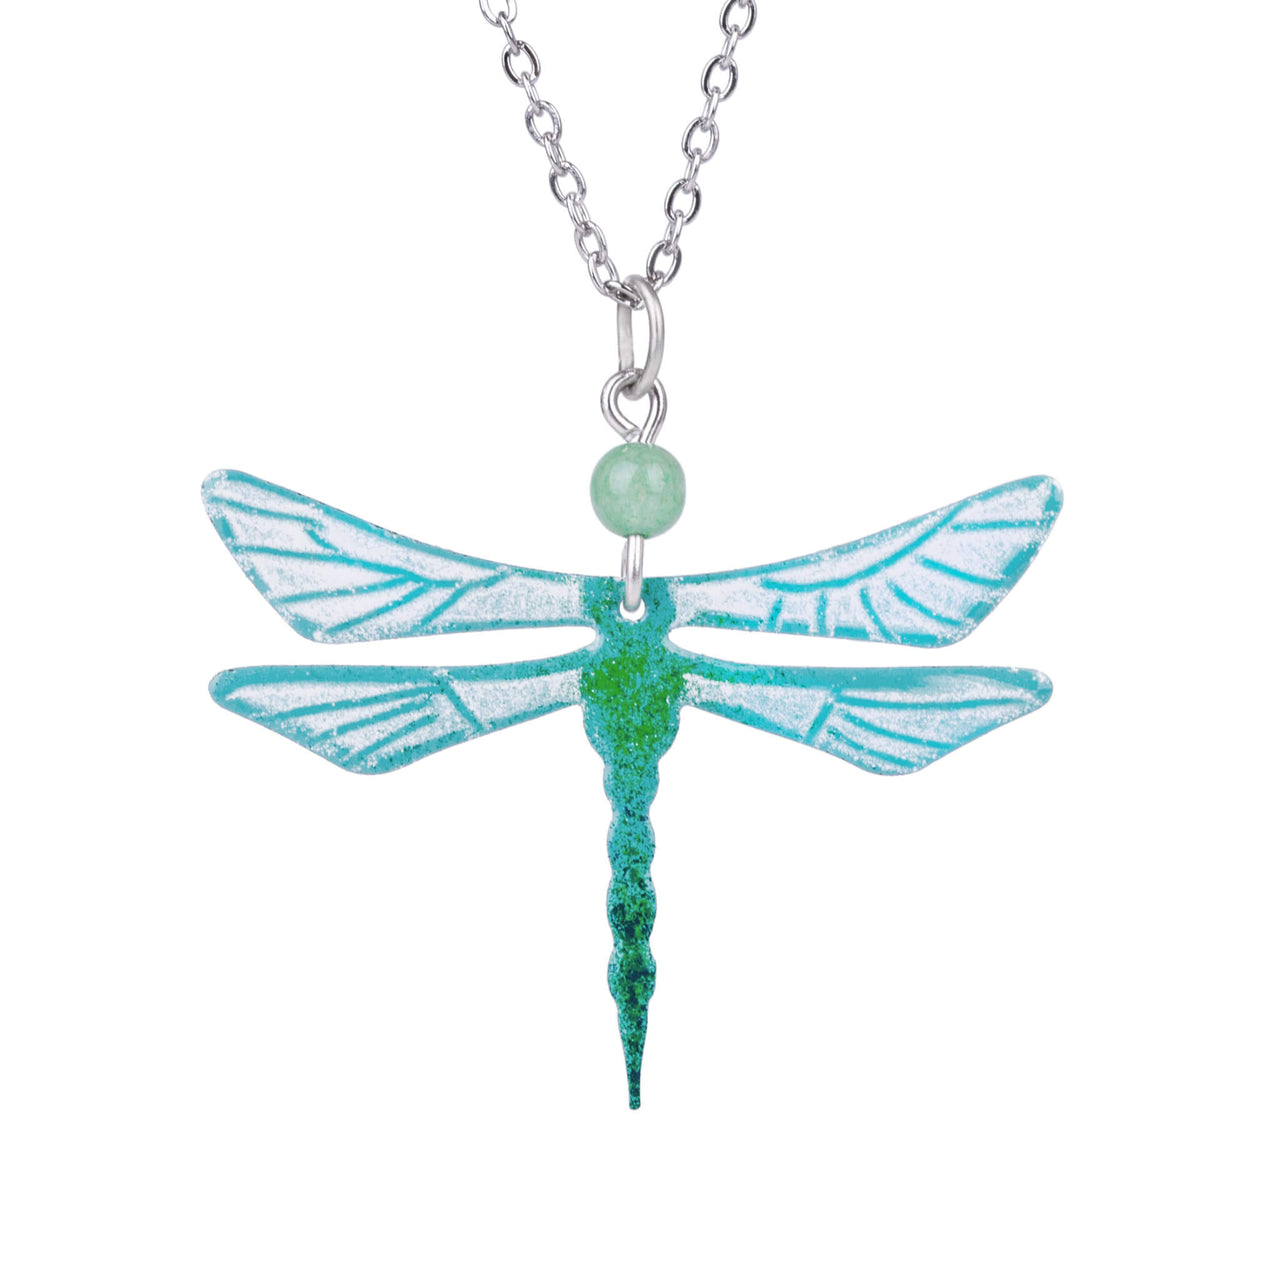 Turquoise dragonfly pendant